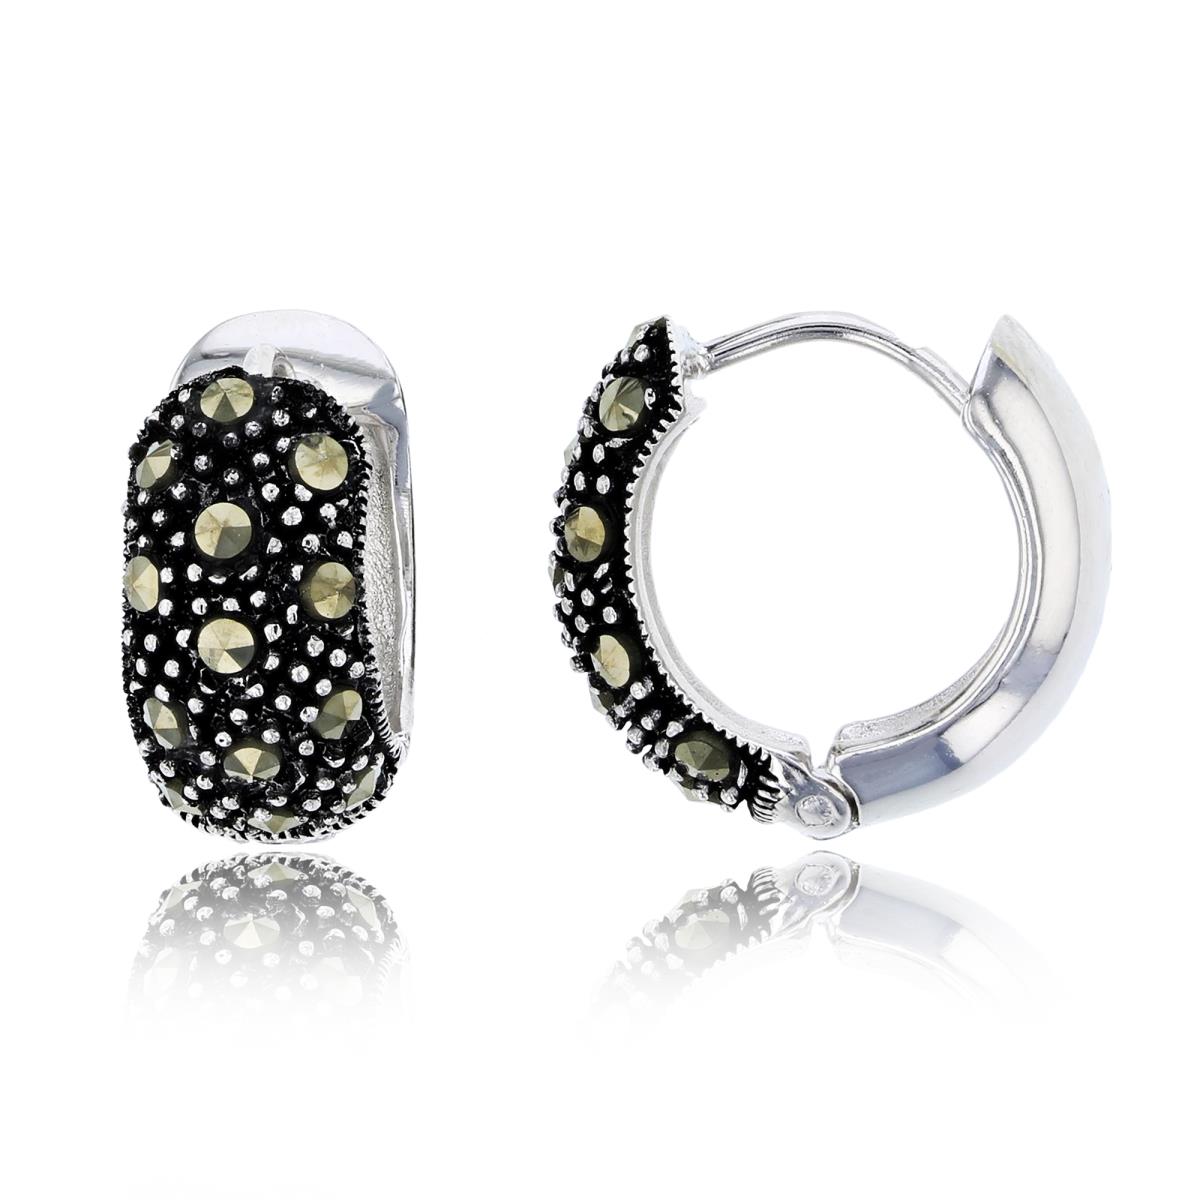 Sterling Silver Oxidized 15x7mm Pave Rd Cut Marcasite Milgrain Huggie Earring